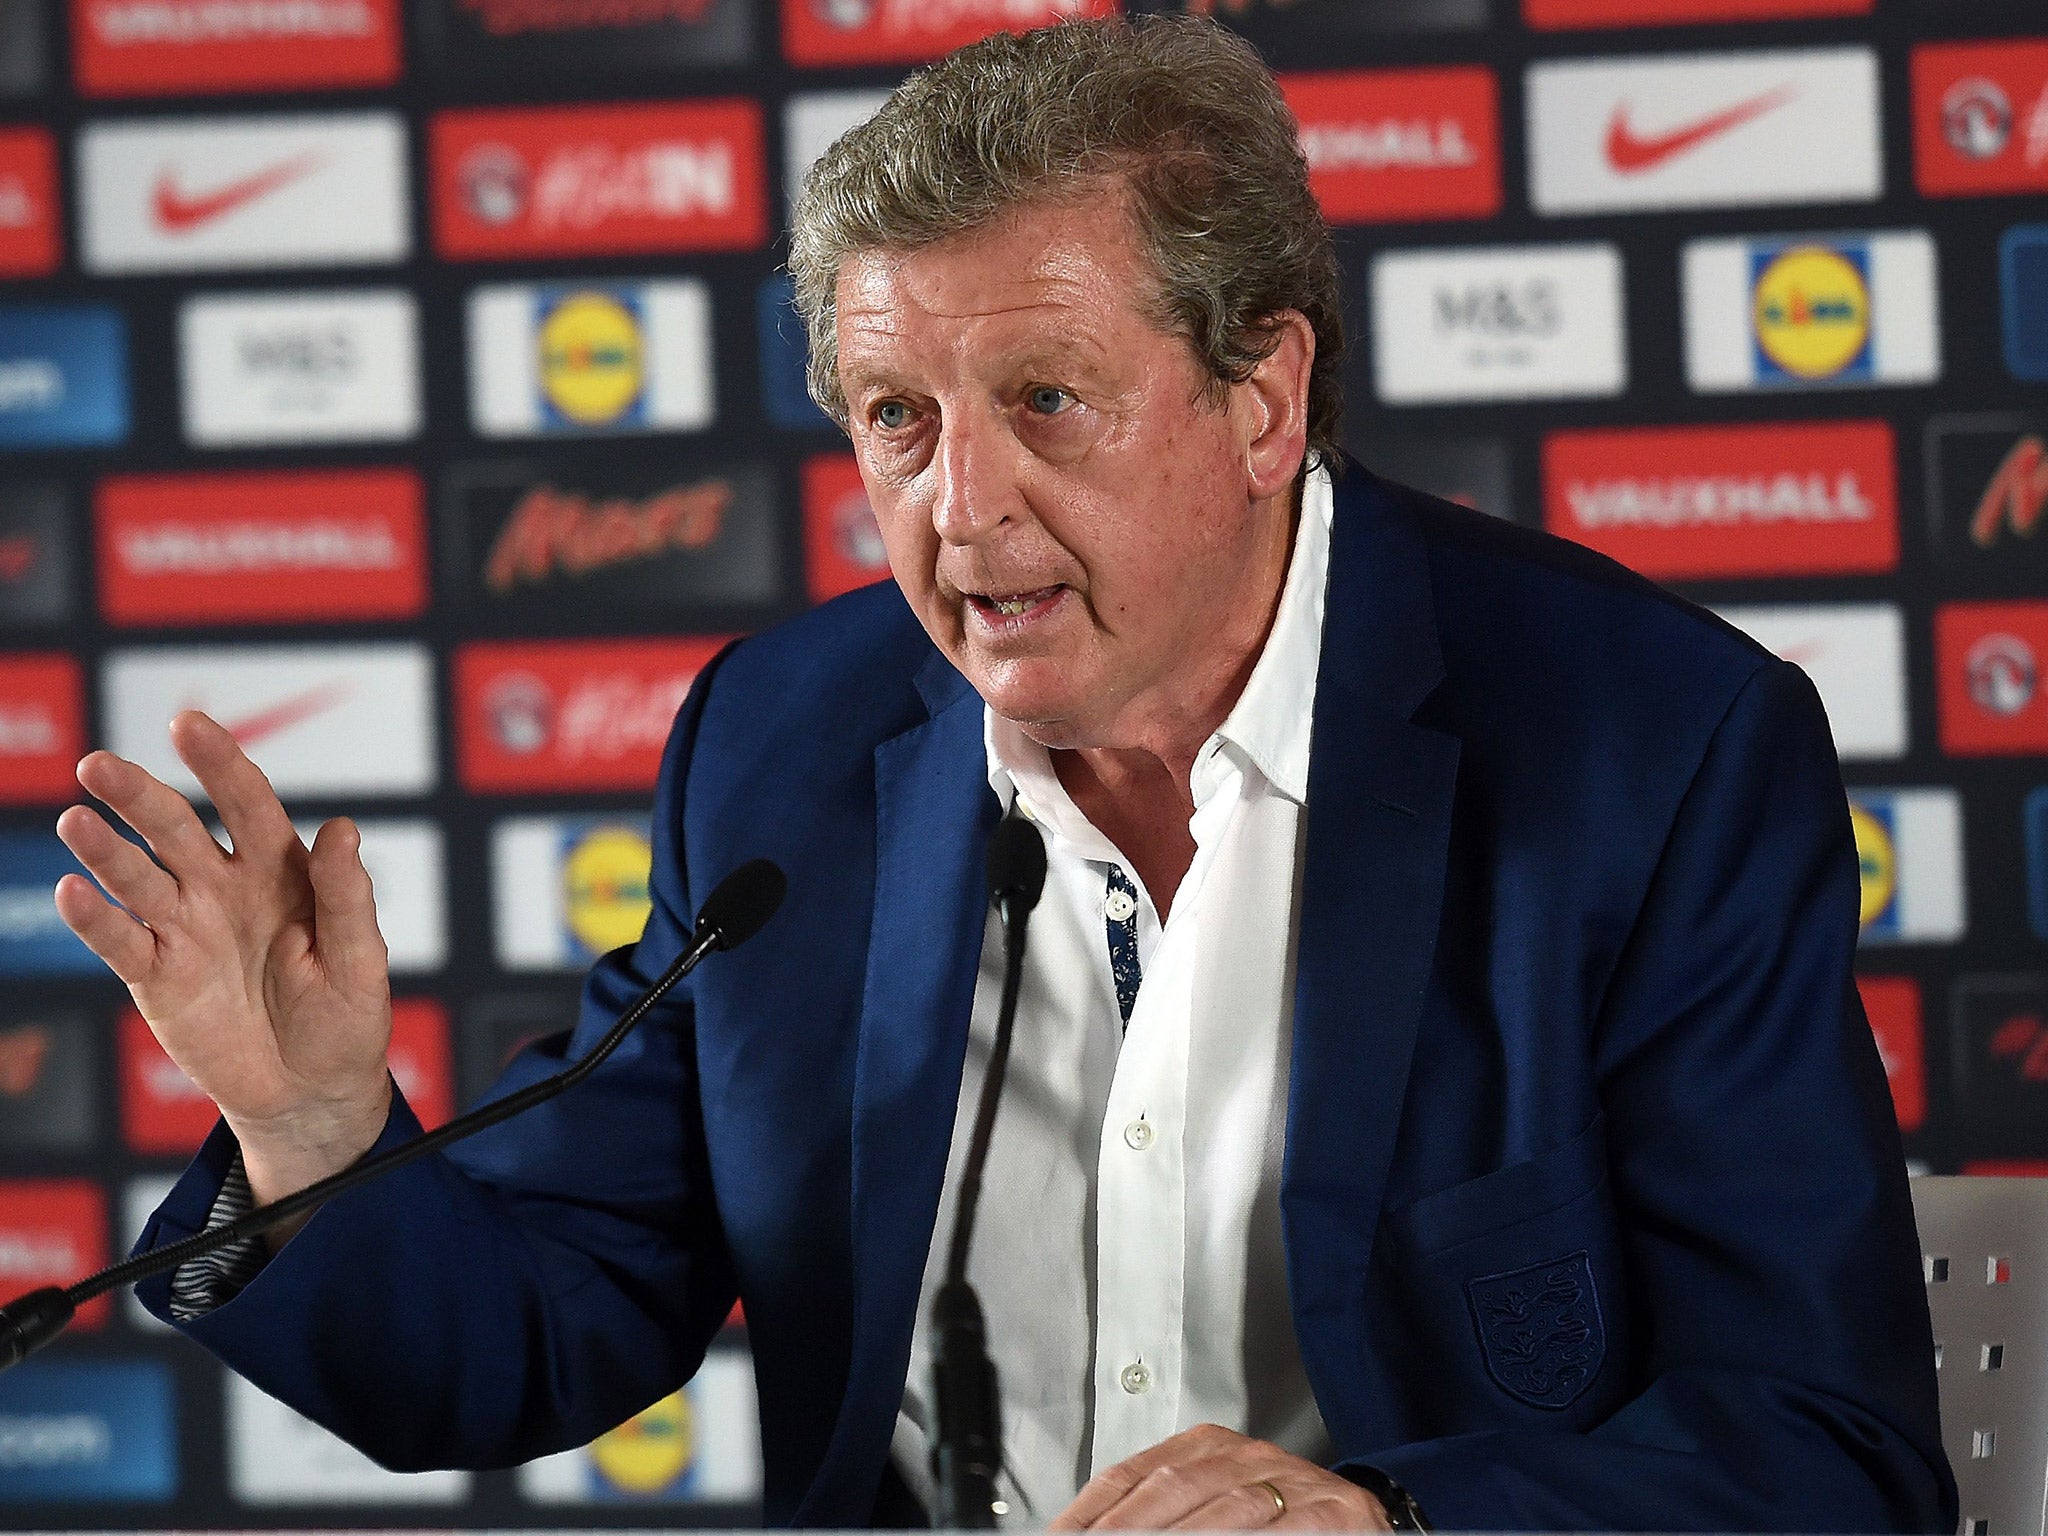 Roy Hodgson claimed he was unaware of any unrest among the England squad at Euro 2016